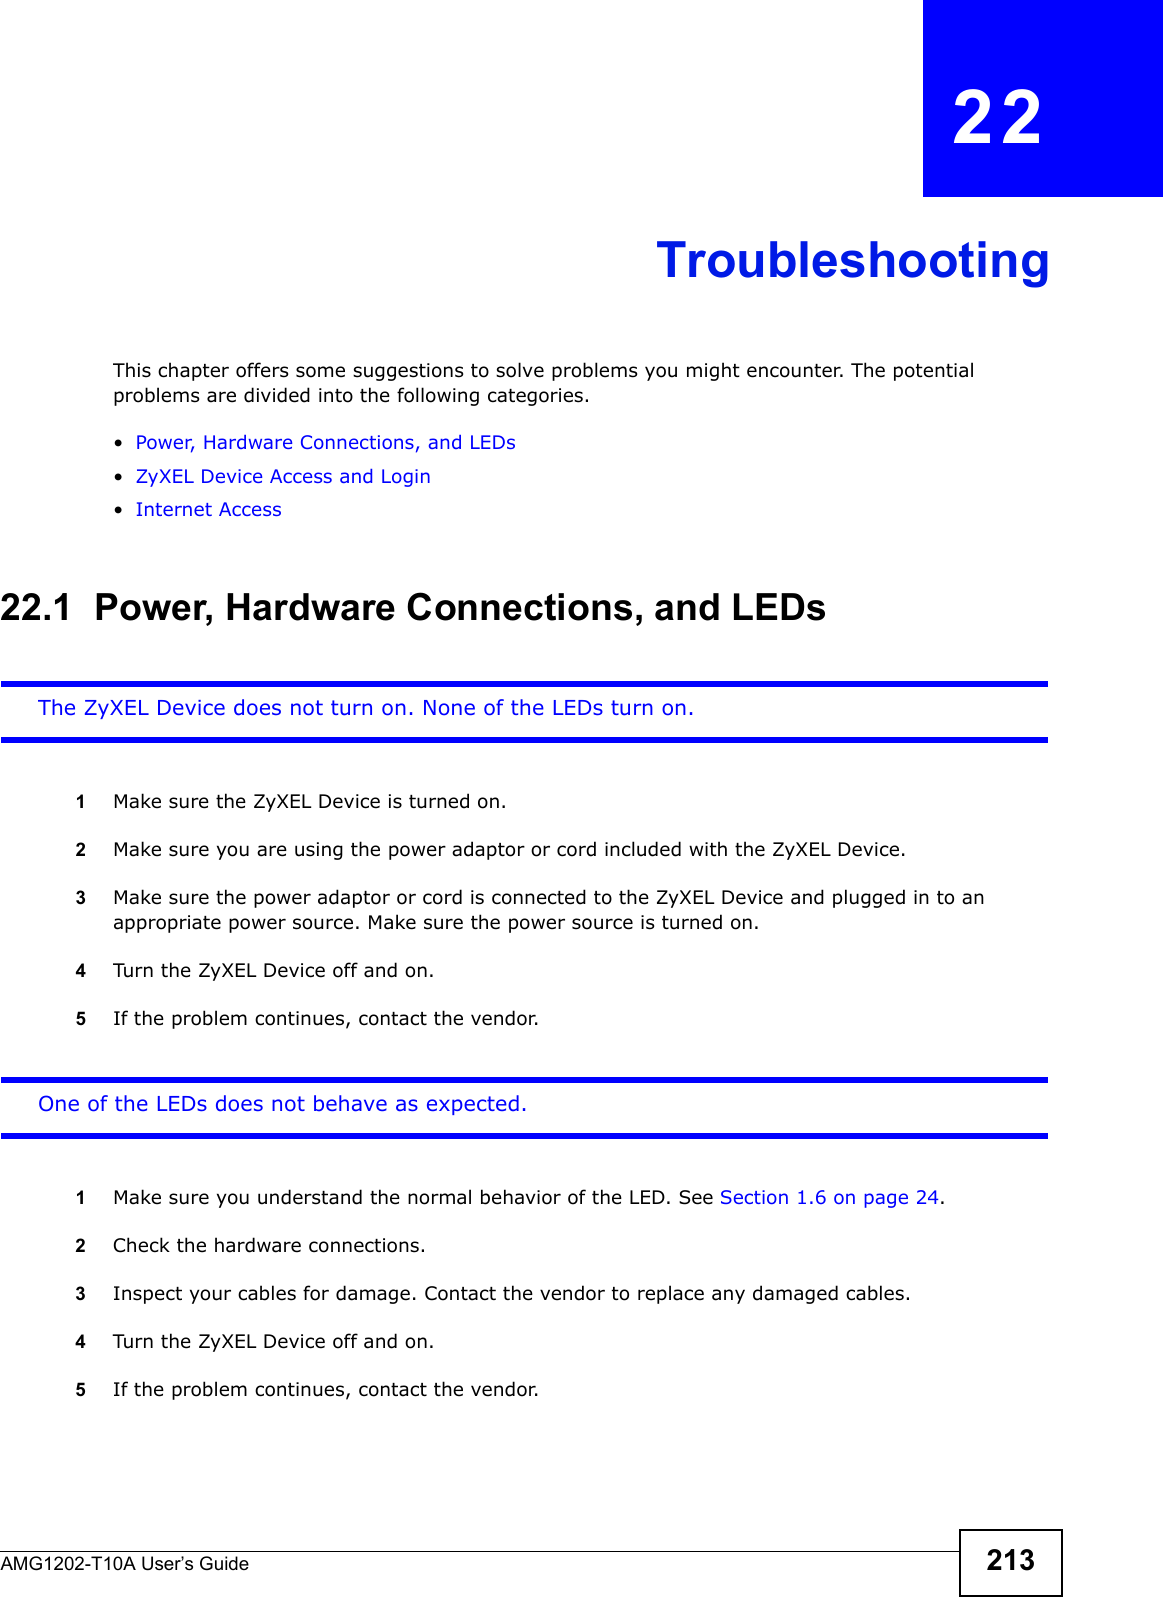 AMG1202-T10A User’s Guide 213CHAPTER   22TroubleshootingThis chapter offers some suggestions to solve problems you might encounter. The potential problems are divided into the following categories. •Power, Hardware Connections, and LEDs•ZyXEL Device Access and Login•Internet Access22.1  Power, Hardware Connections, and LEDsThe ZyXEL Device does not turn on. None of the LEDs turn on.1Make sure the ZyXEL Device is turned on. 2Make sure you are using the power adaptor or cord included with the ZyXEL Device.3Make sure the power adaptor or cord is connected to the ZyXEL Device and plugged in to an appropriate power source. Make sure the power source is turned on.4Turn the ZyXEL Device off and on.5If the problem continues, contact the vendor.One of the LEDs does not behave as expected.1Make sure you understand the normal behavior of the LED. See Section 1.6 on page 24.2Check the hardware connections.3Inspect your cables for damage. Contact the vendor to replace any damaged cables.4Turn the ZyXEL Device off and on.5If the problem continues, contact the vendor.